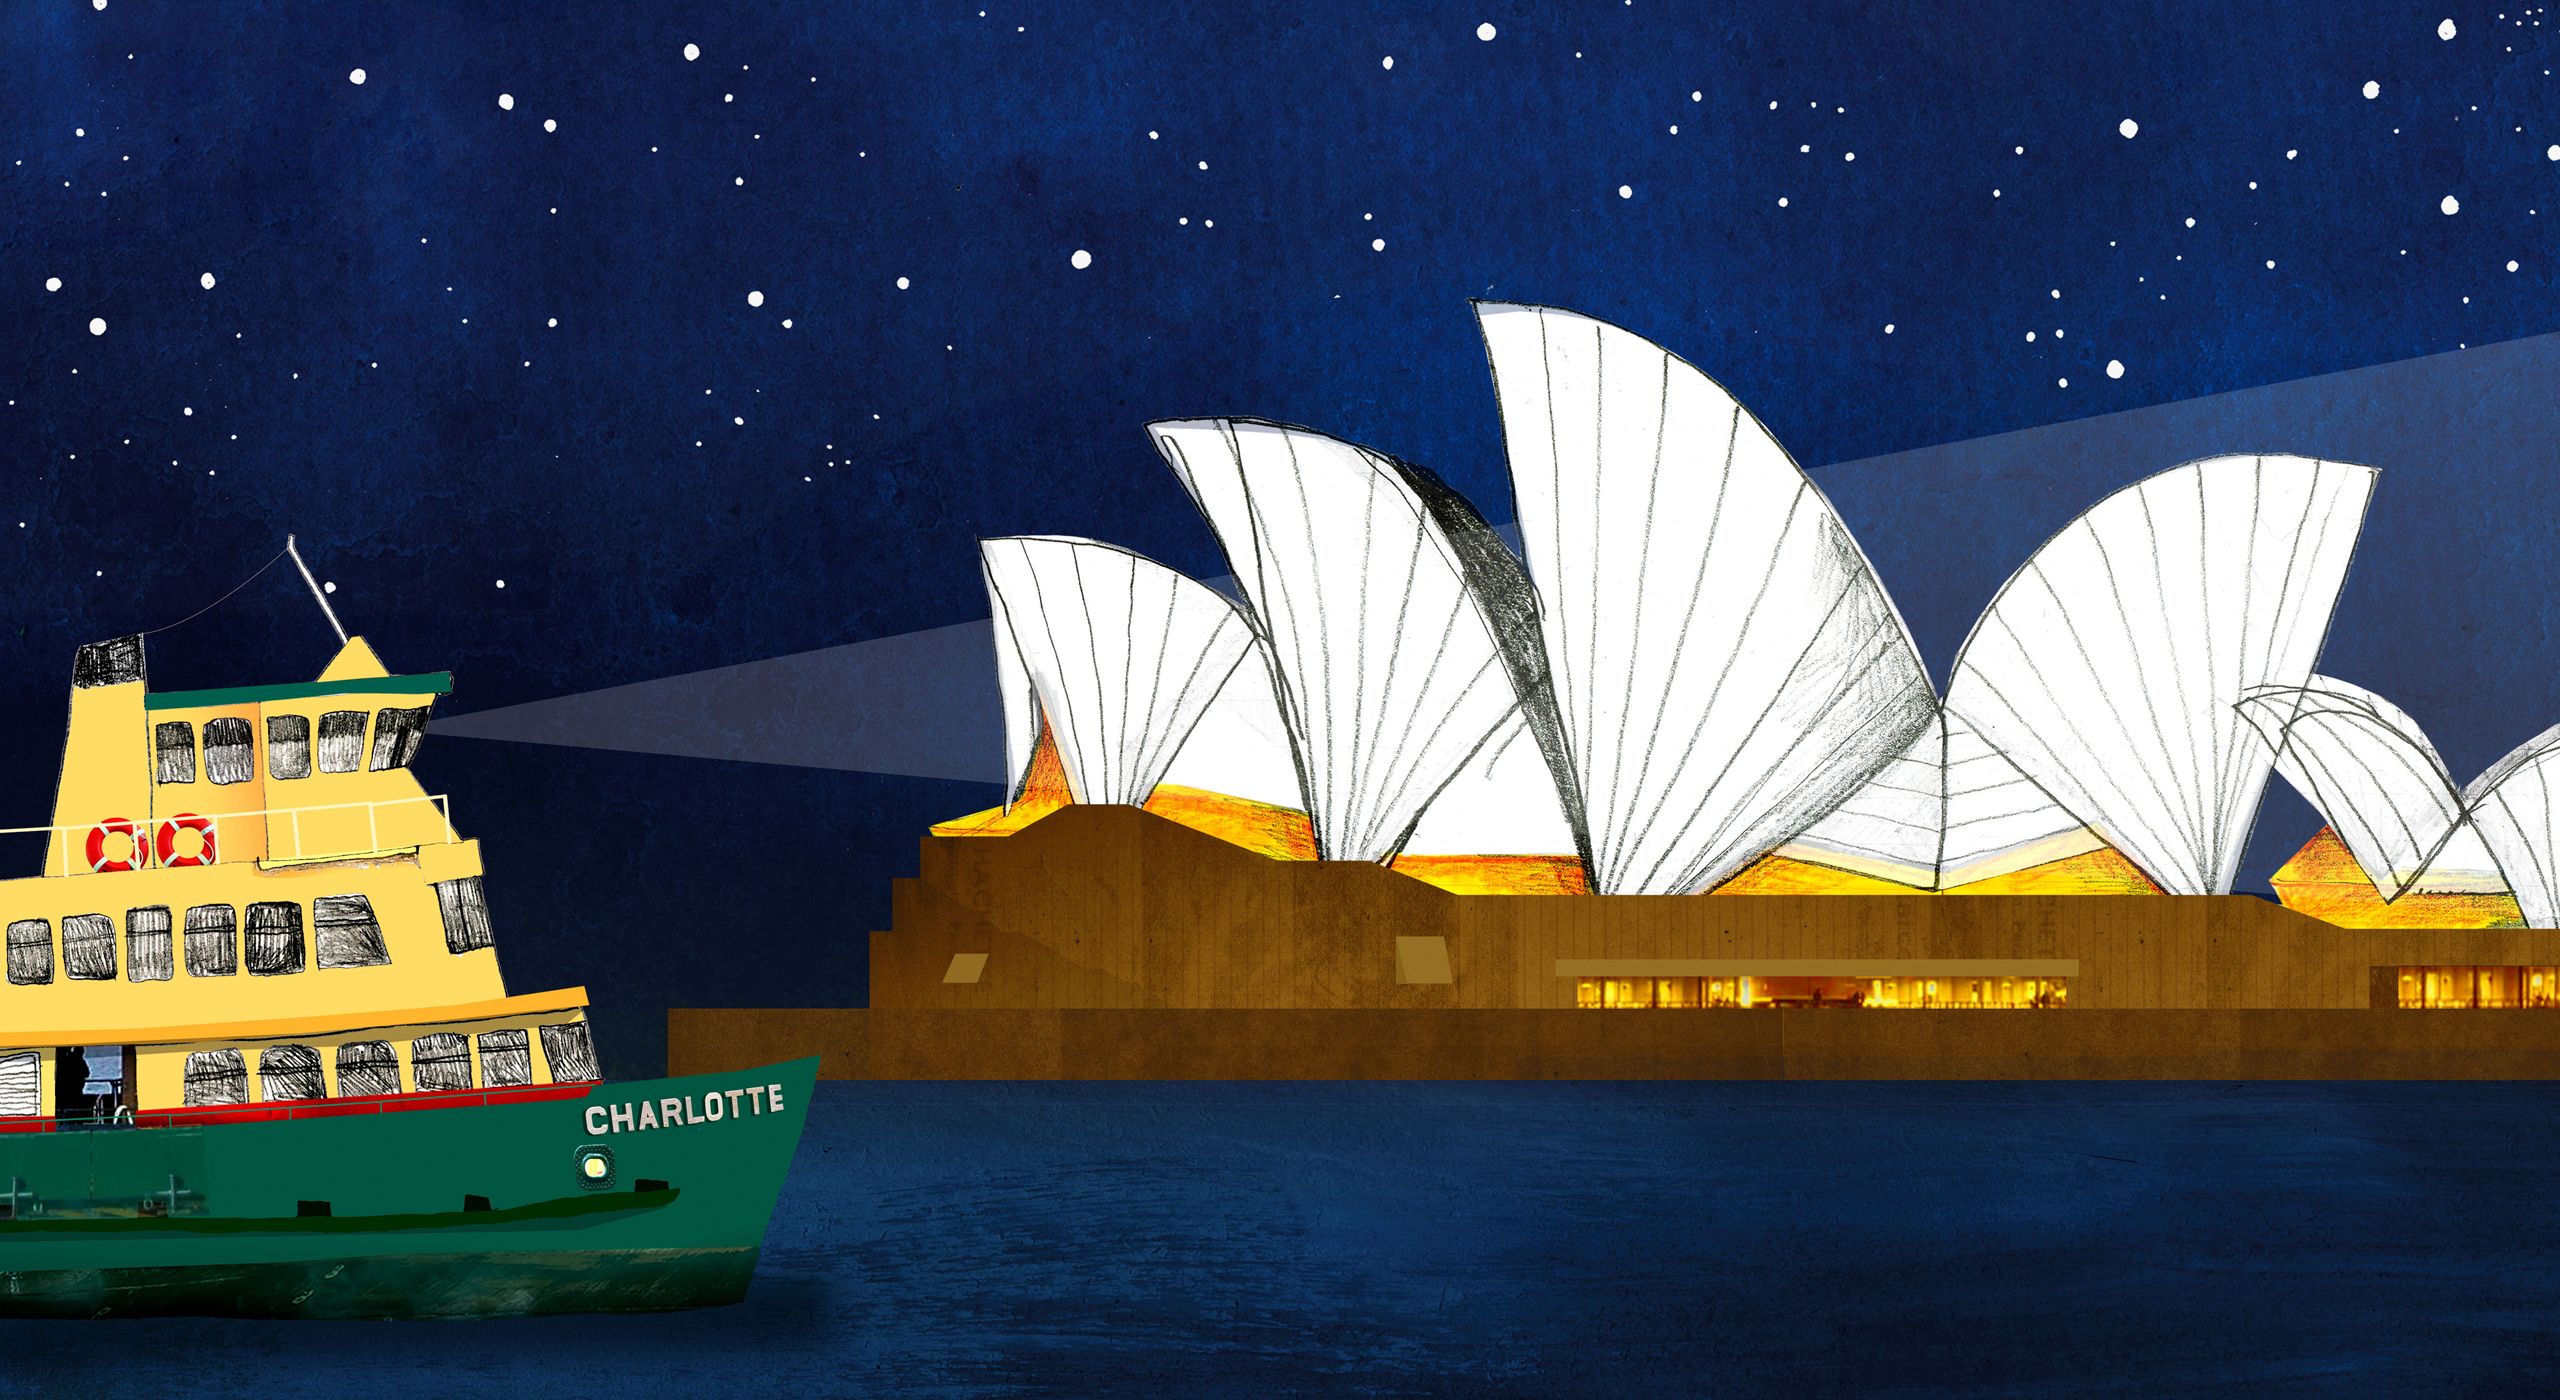 An illustration of a Manly ferry and the Sydney Opera House